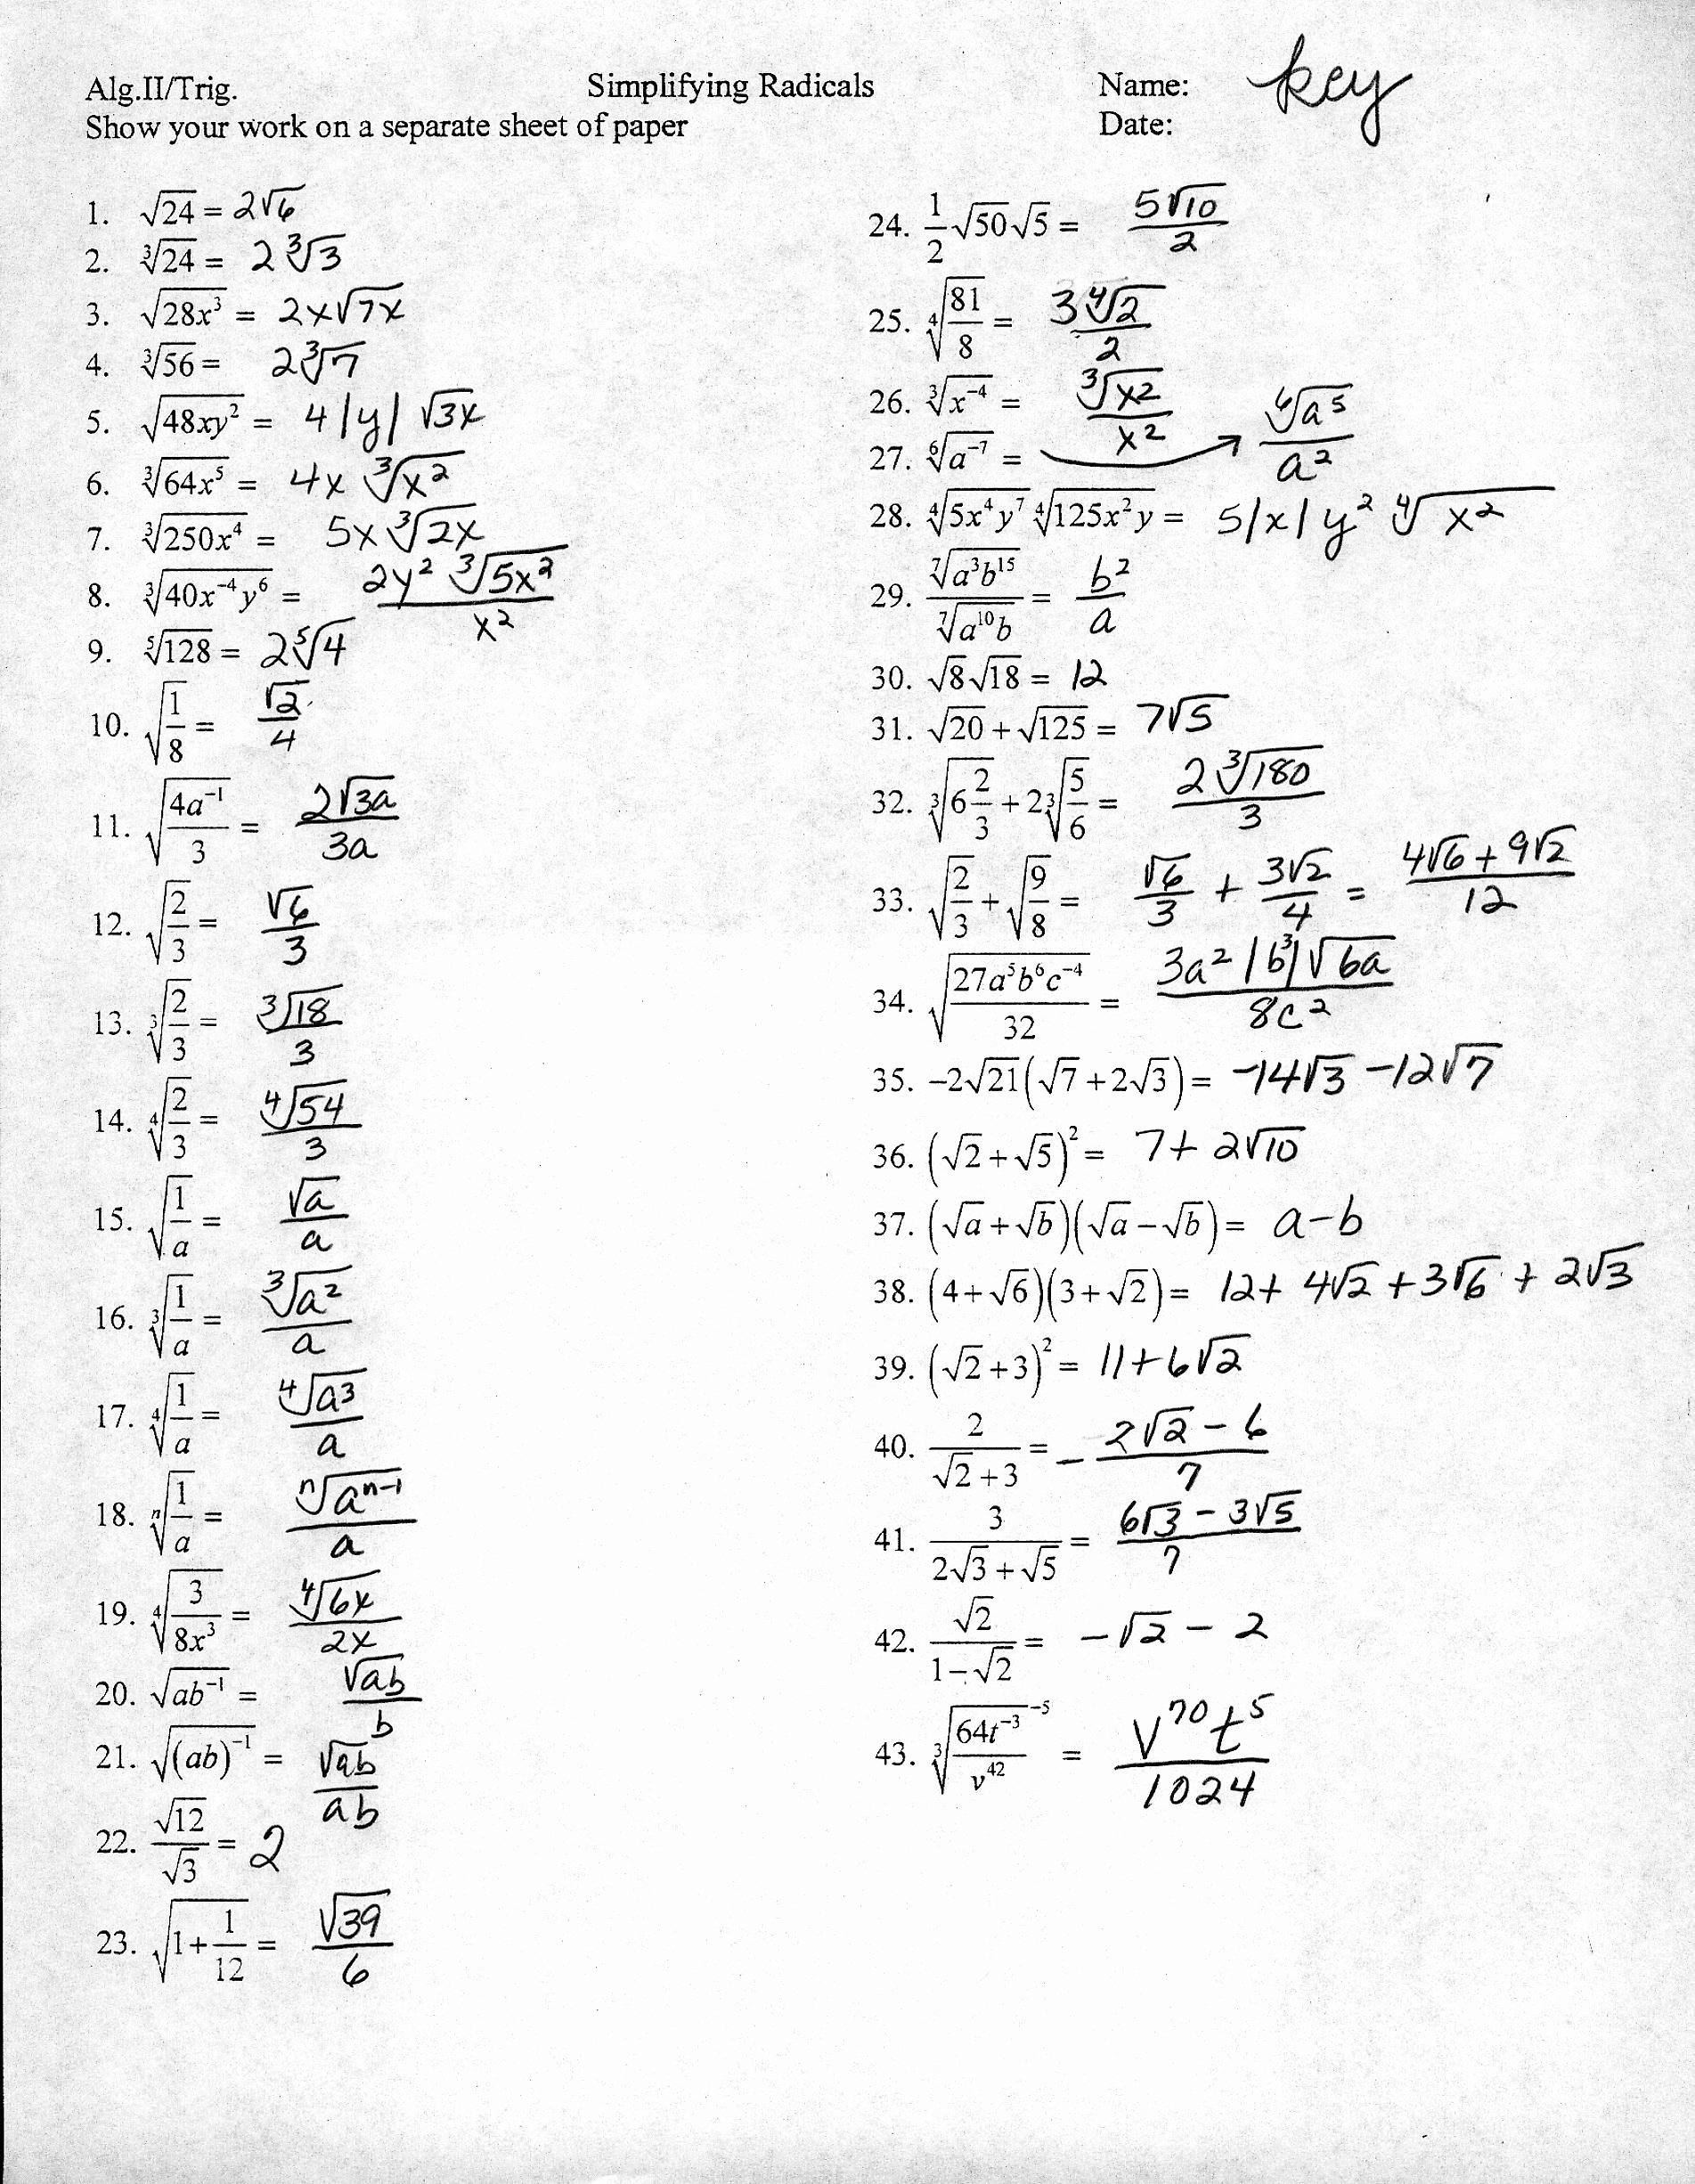 Simplifying Radicals Worksheet 1 Answers Luxury Exponential Expressions and Equations Worksheet 1 Answer